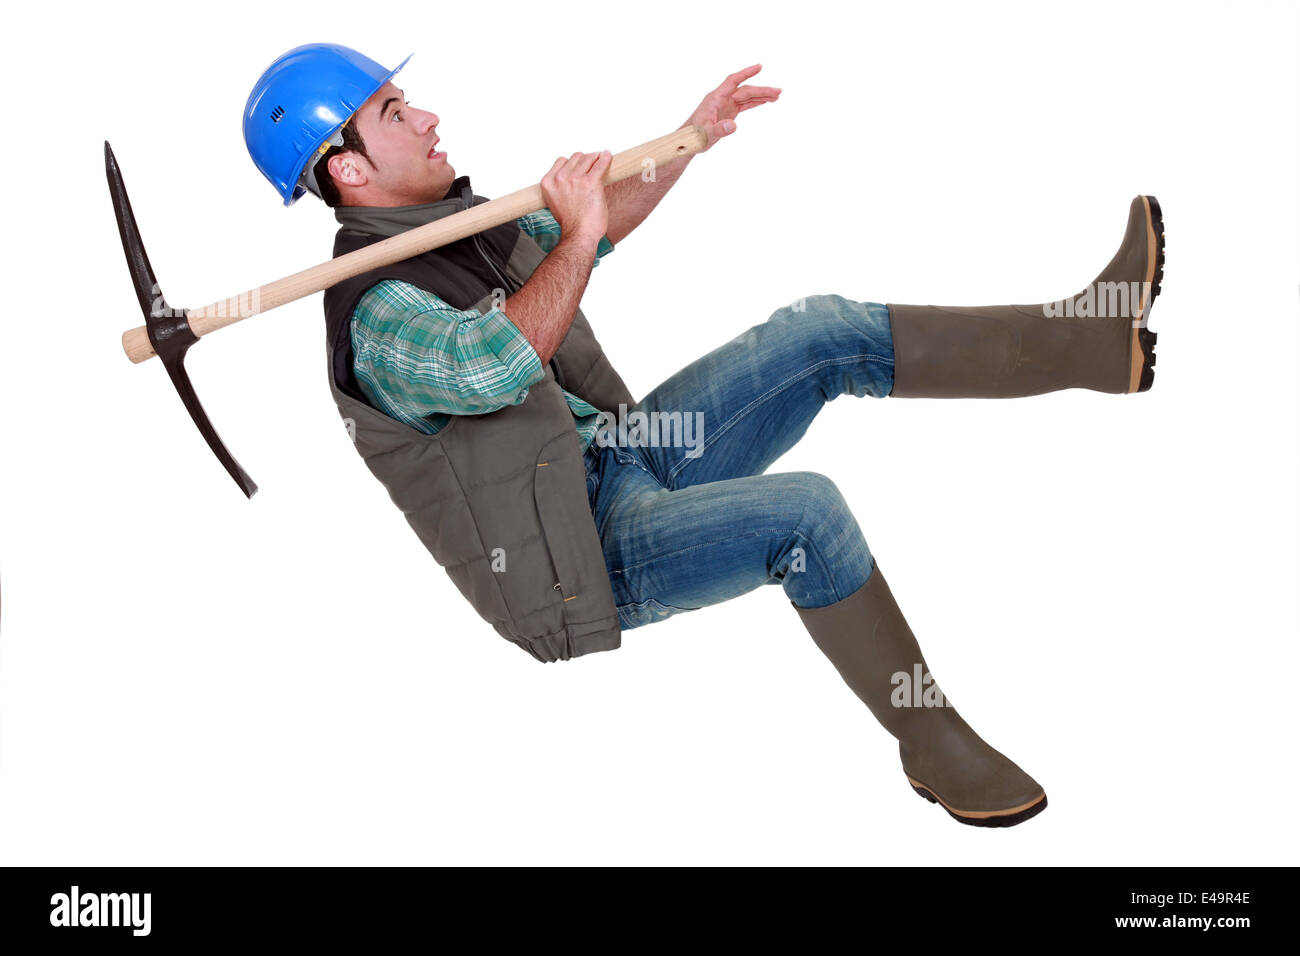 Man with pick-axe falling off chair Stock Photo